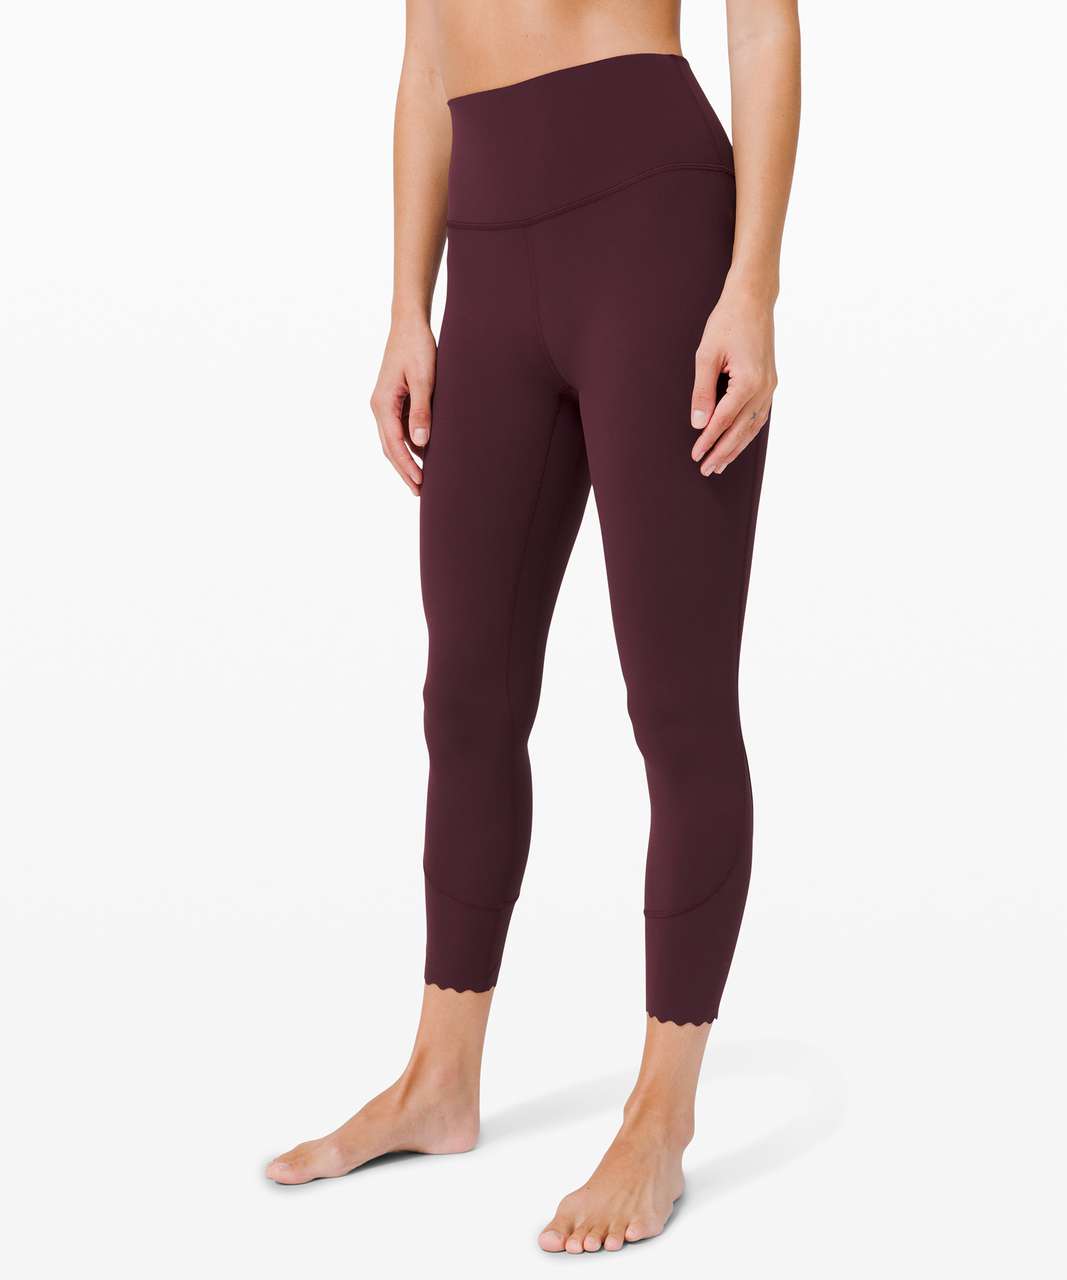 Lululemon Align High-Rise Pant 25" *Scallop - Cassis